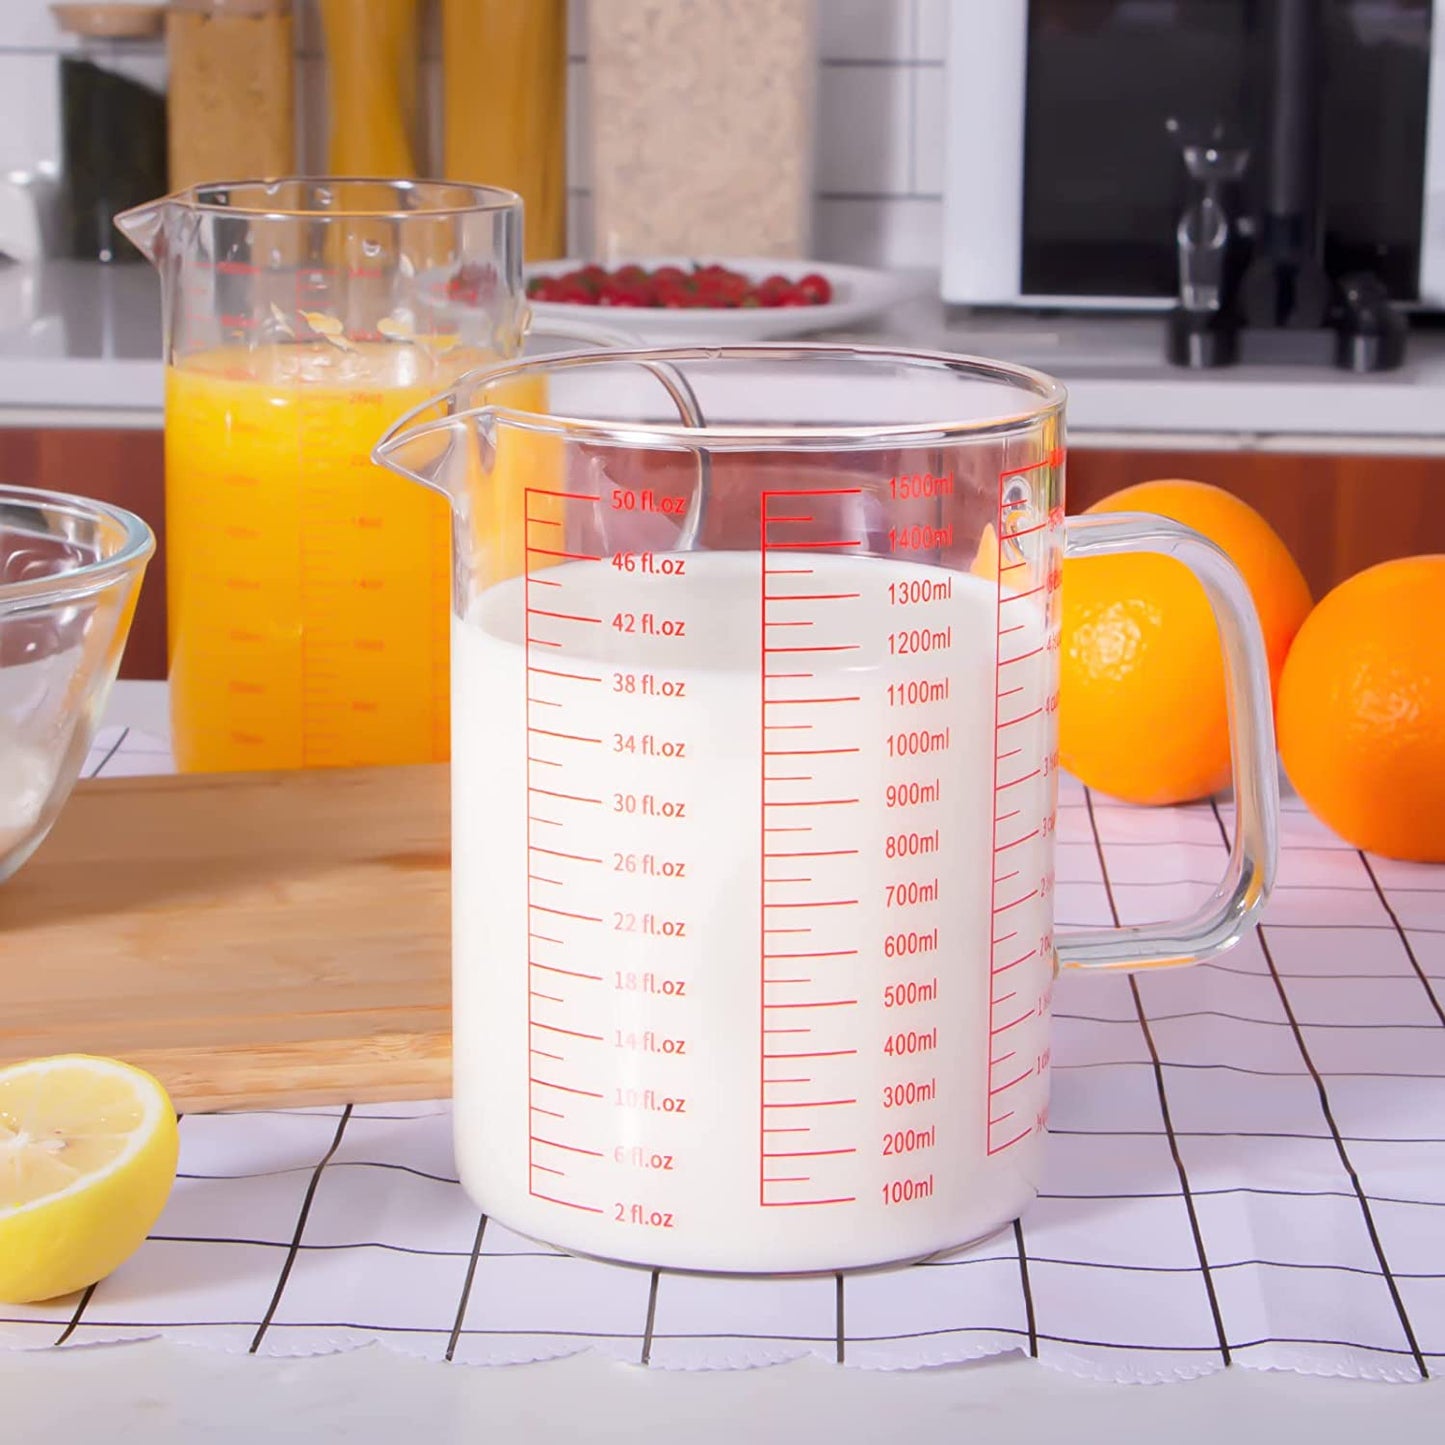 50oz/6 Cups Glass Measuring Cup, Easy to Read with 3 measurement scales (Ml/Oz/Cup)